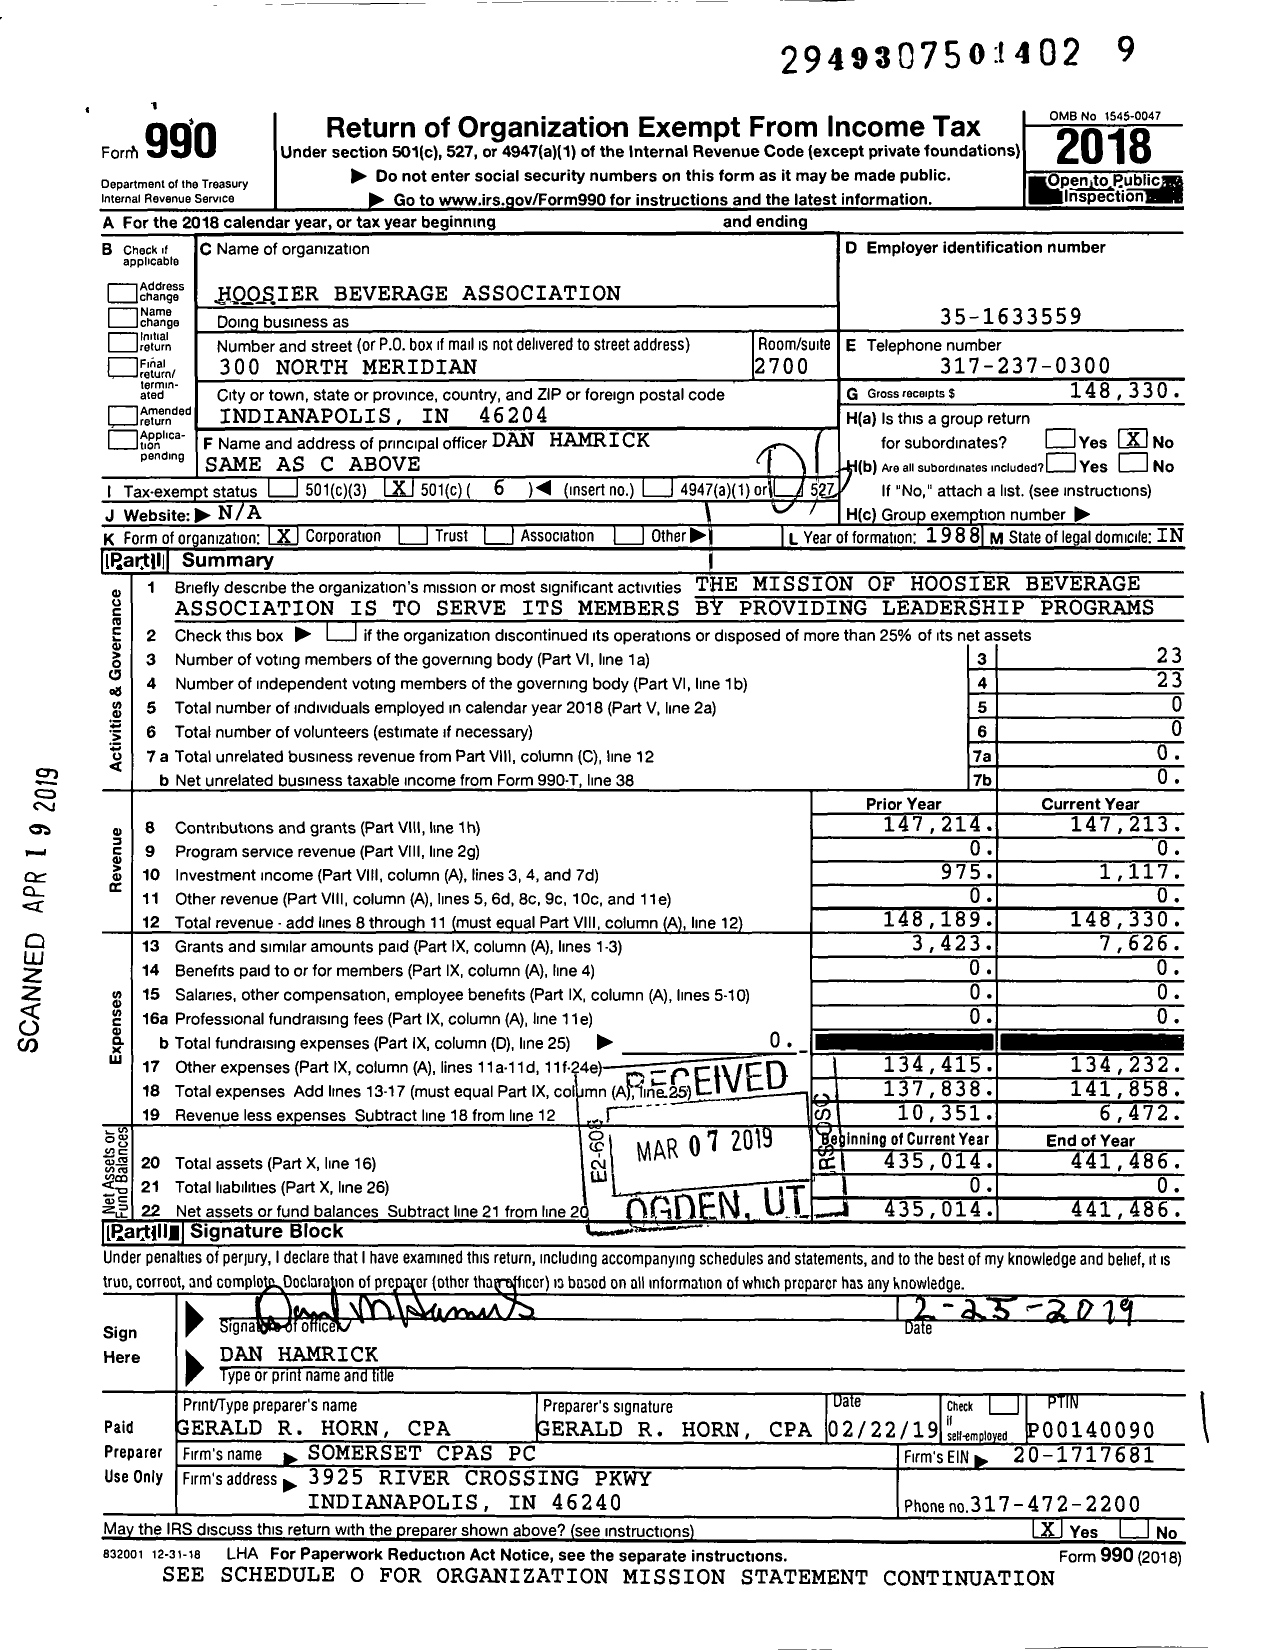 Image of first page of 2018 Form 990O for Hoosier Beverage Association